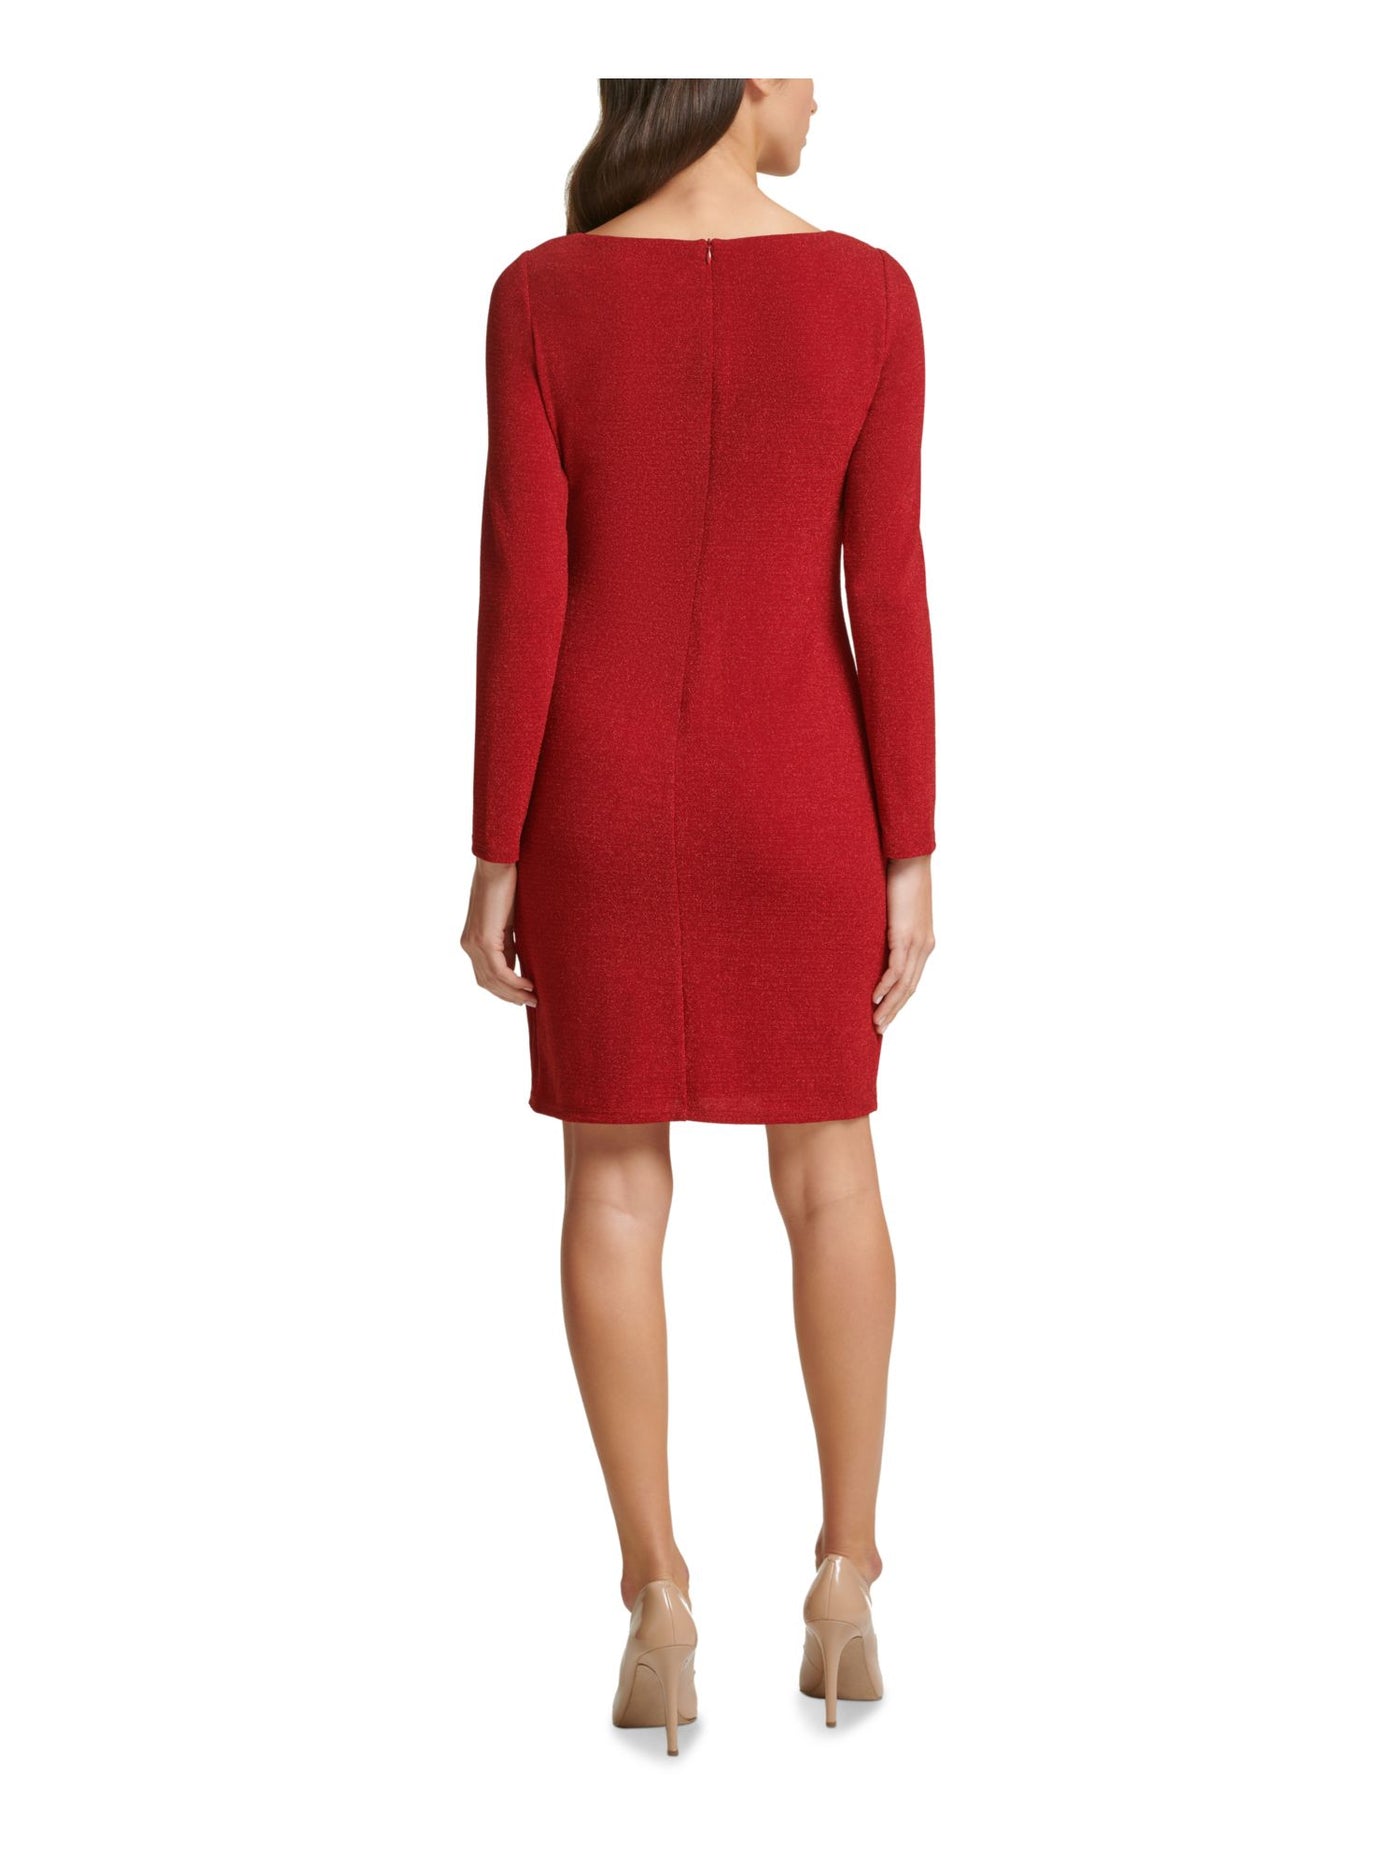 JESSICA HOWARD Womens Red Glitter Long Sleeve Boat Neck Above The Knee Cocktail Sheath Dress Plus 22W